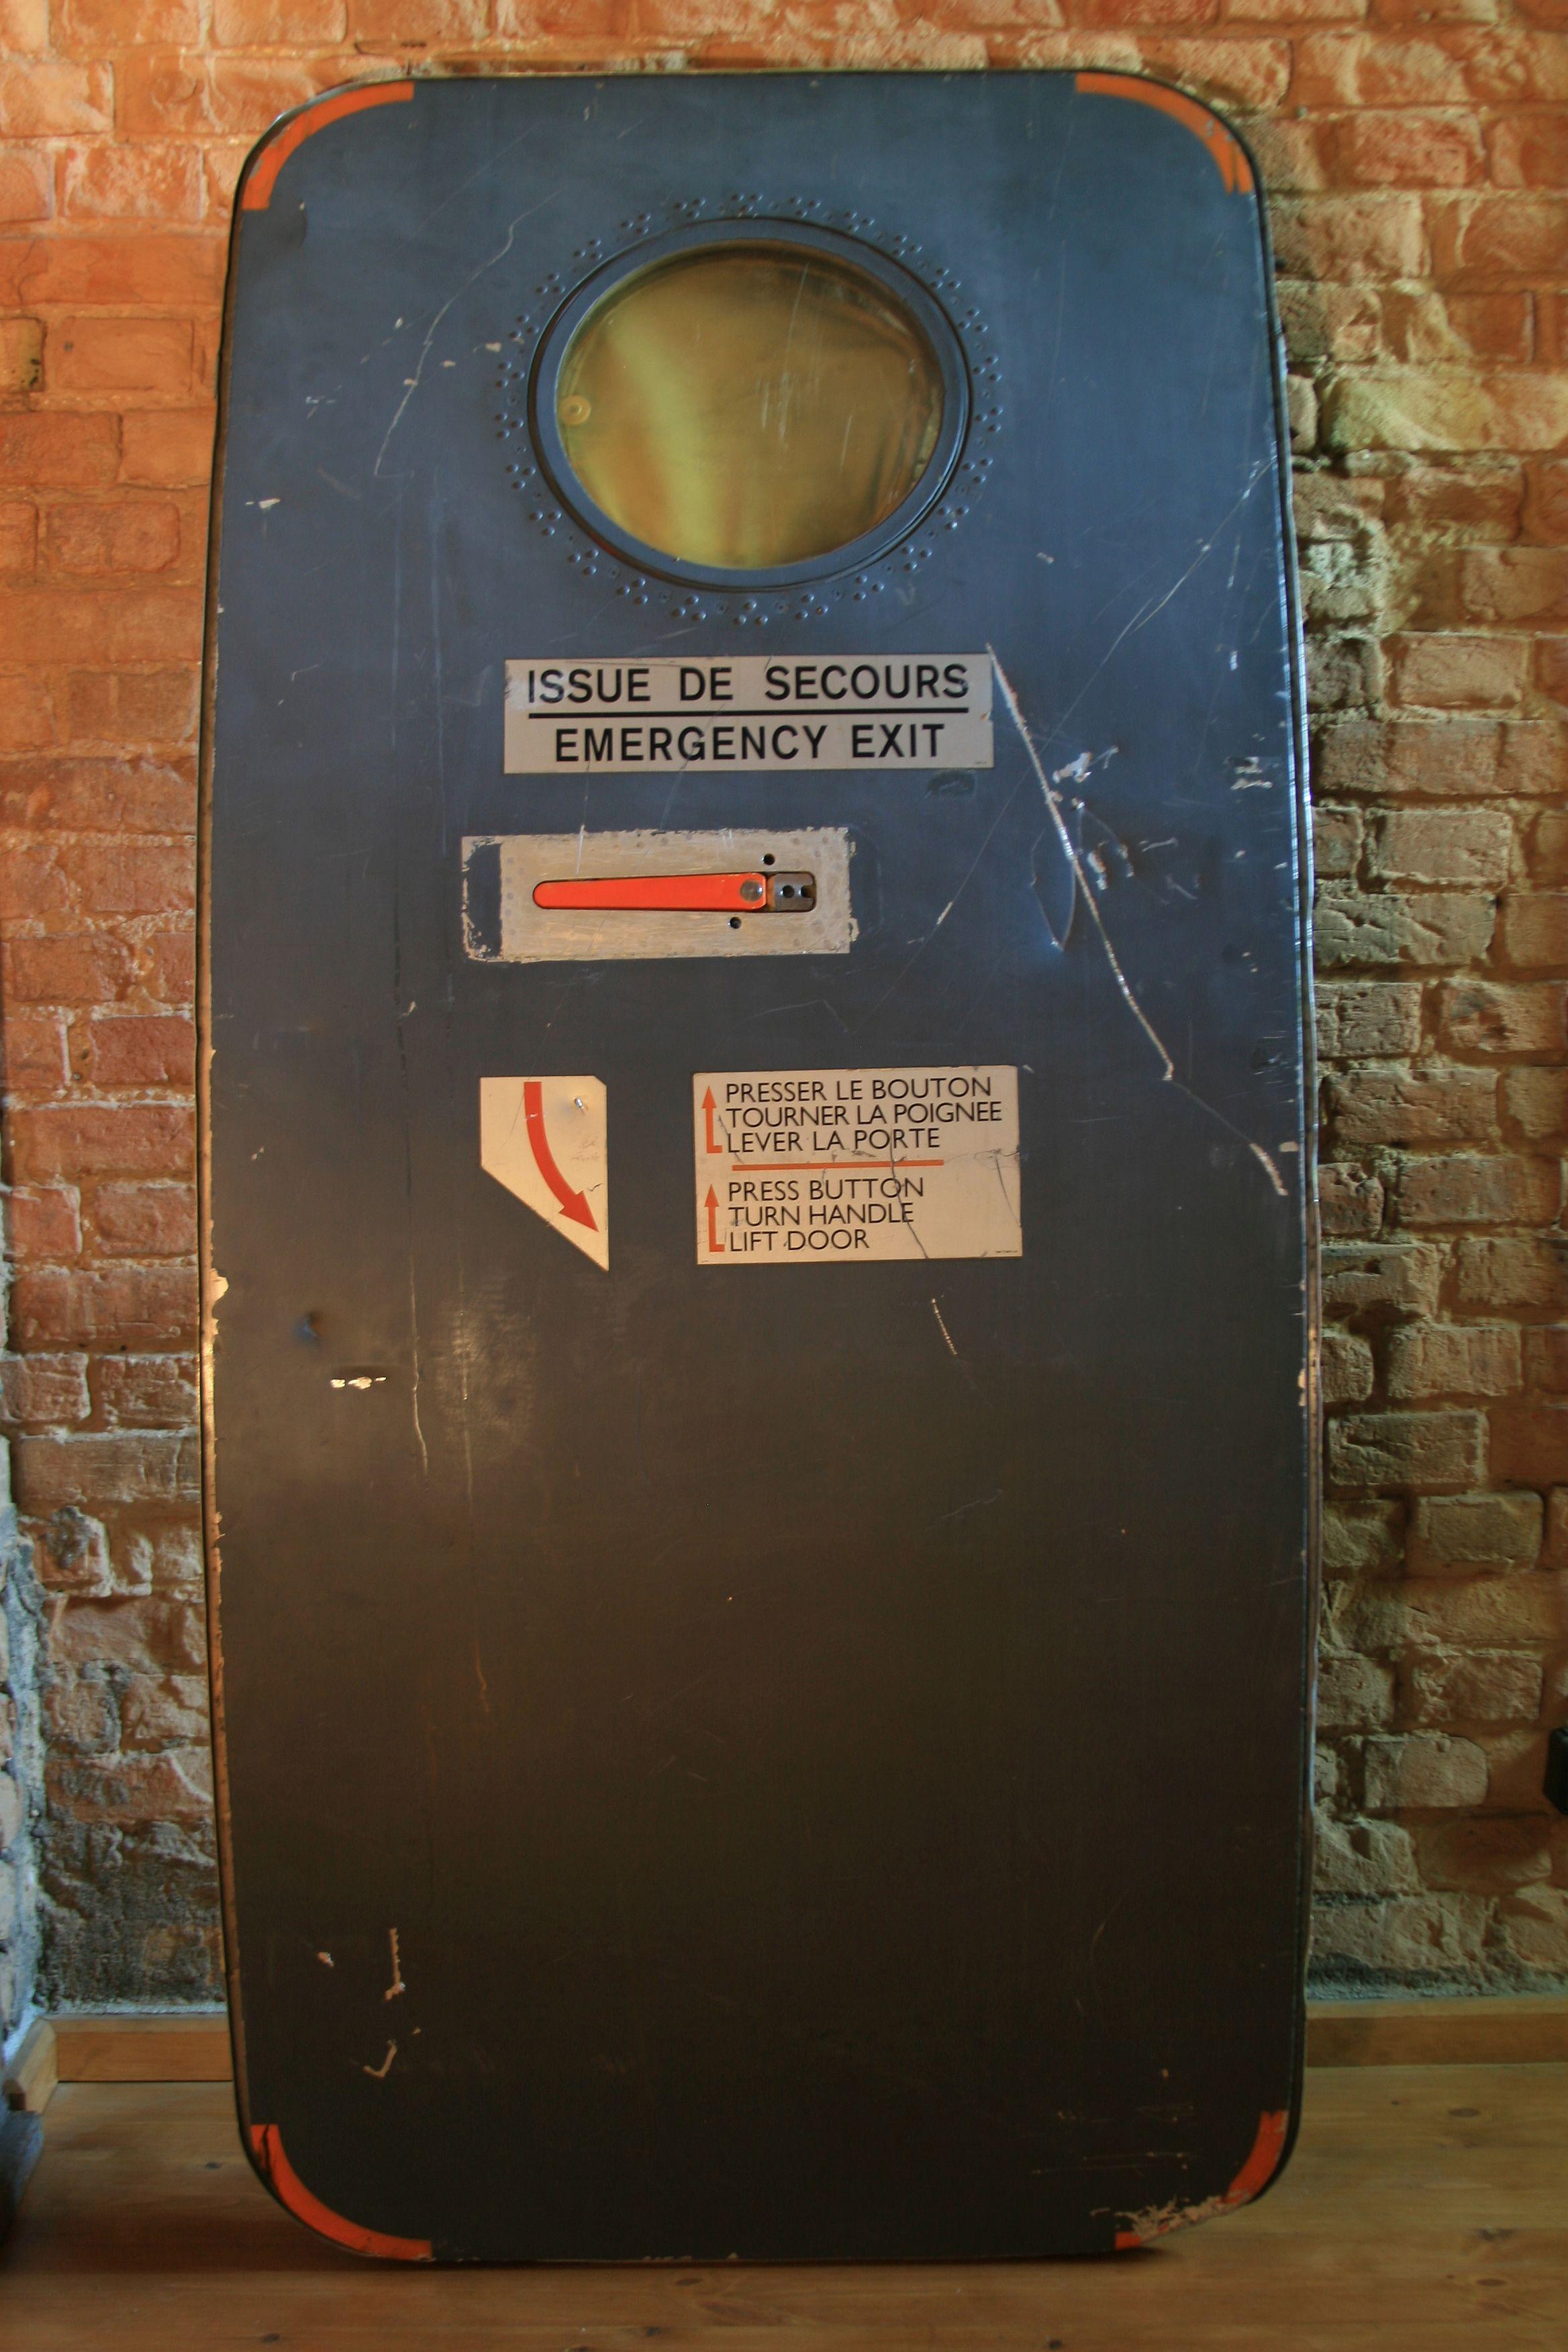 The original emergency exit door from the Transall C-160 military transport aircraft which was produced between 1963 and 1985, and was among the equipment of French, German and Turkish air forces.
Manufacturer: VFW Fokker
Year of production: